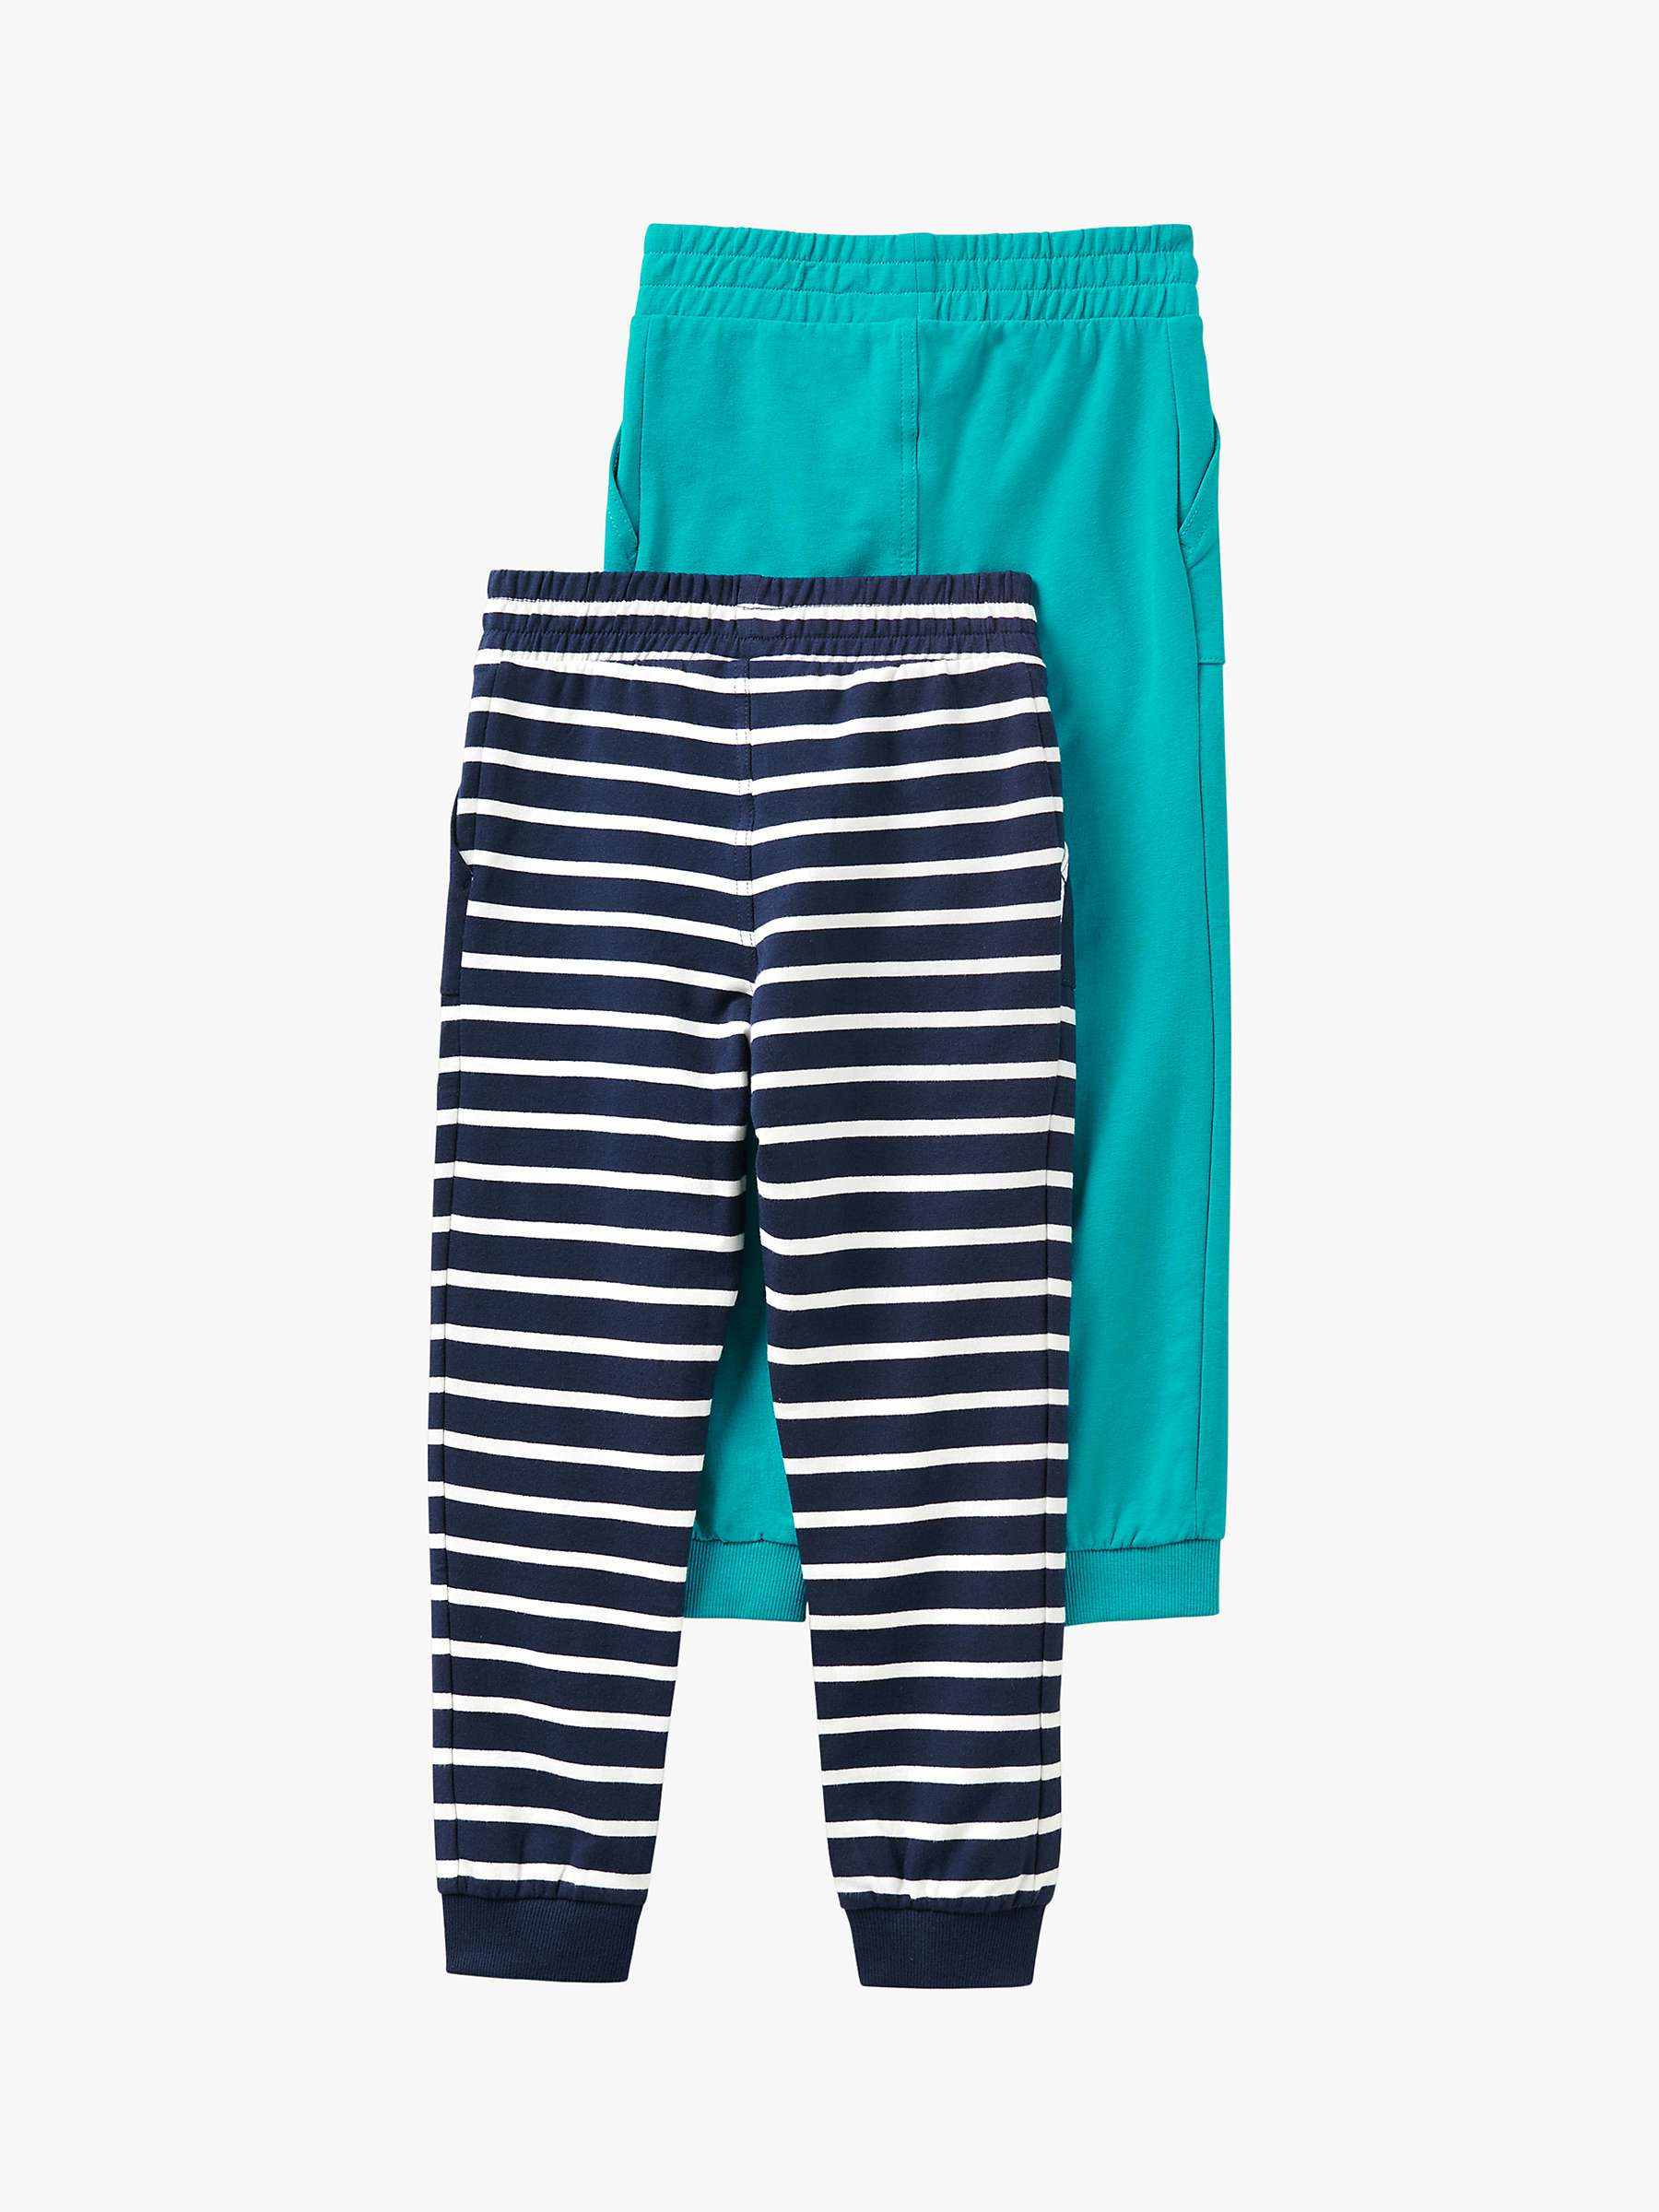 Buy Crew Clothing Kids' Lightweight Jazzy Stripe/ Plain Joggers, Pack Of 2, Blue/Multi Online at johnlewis.com